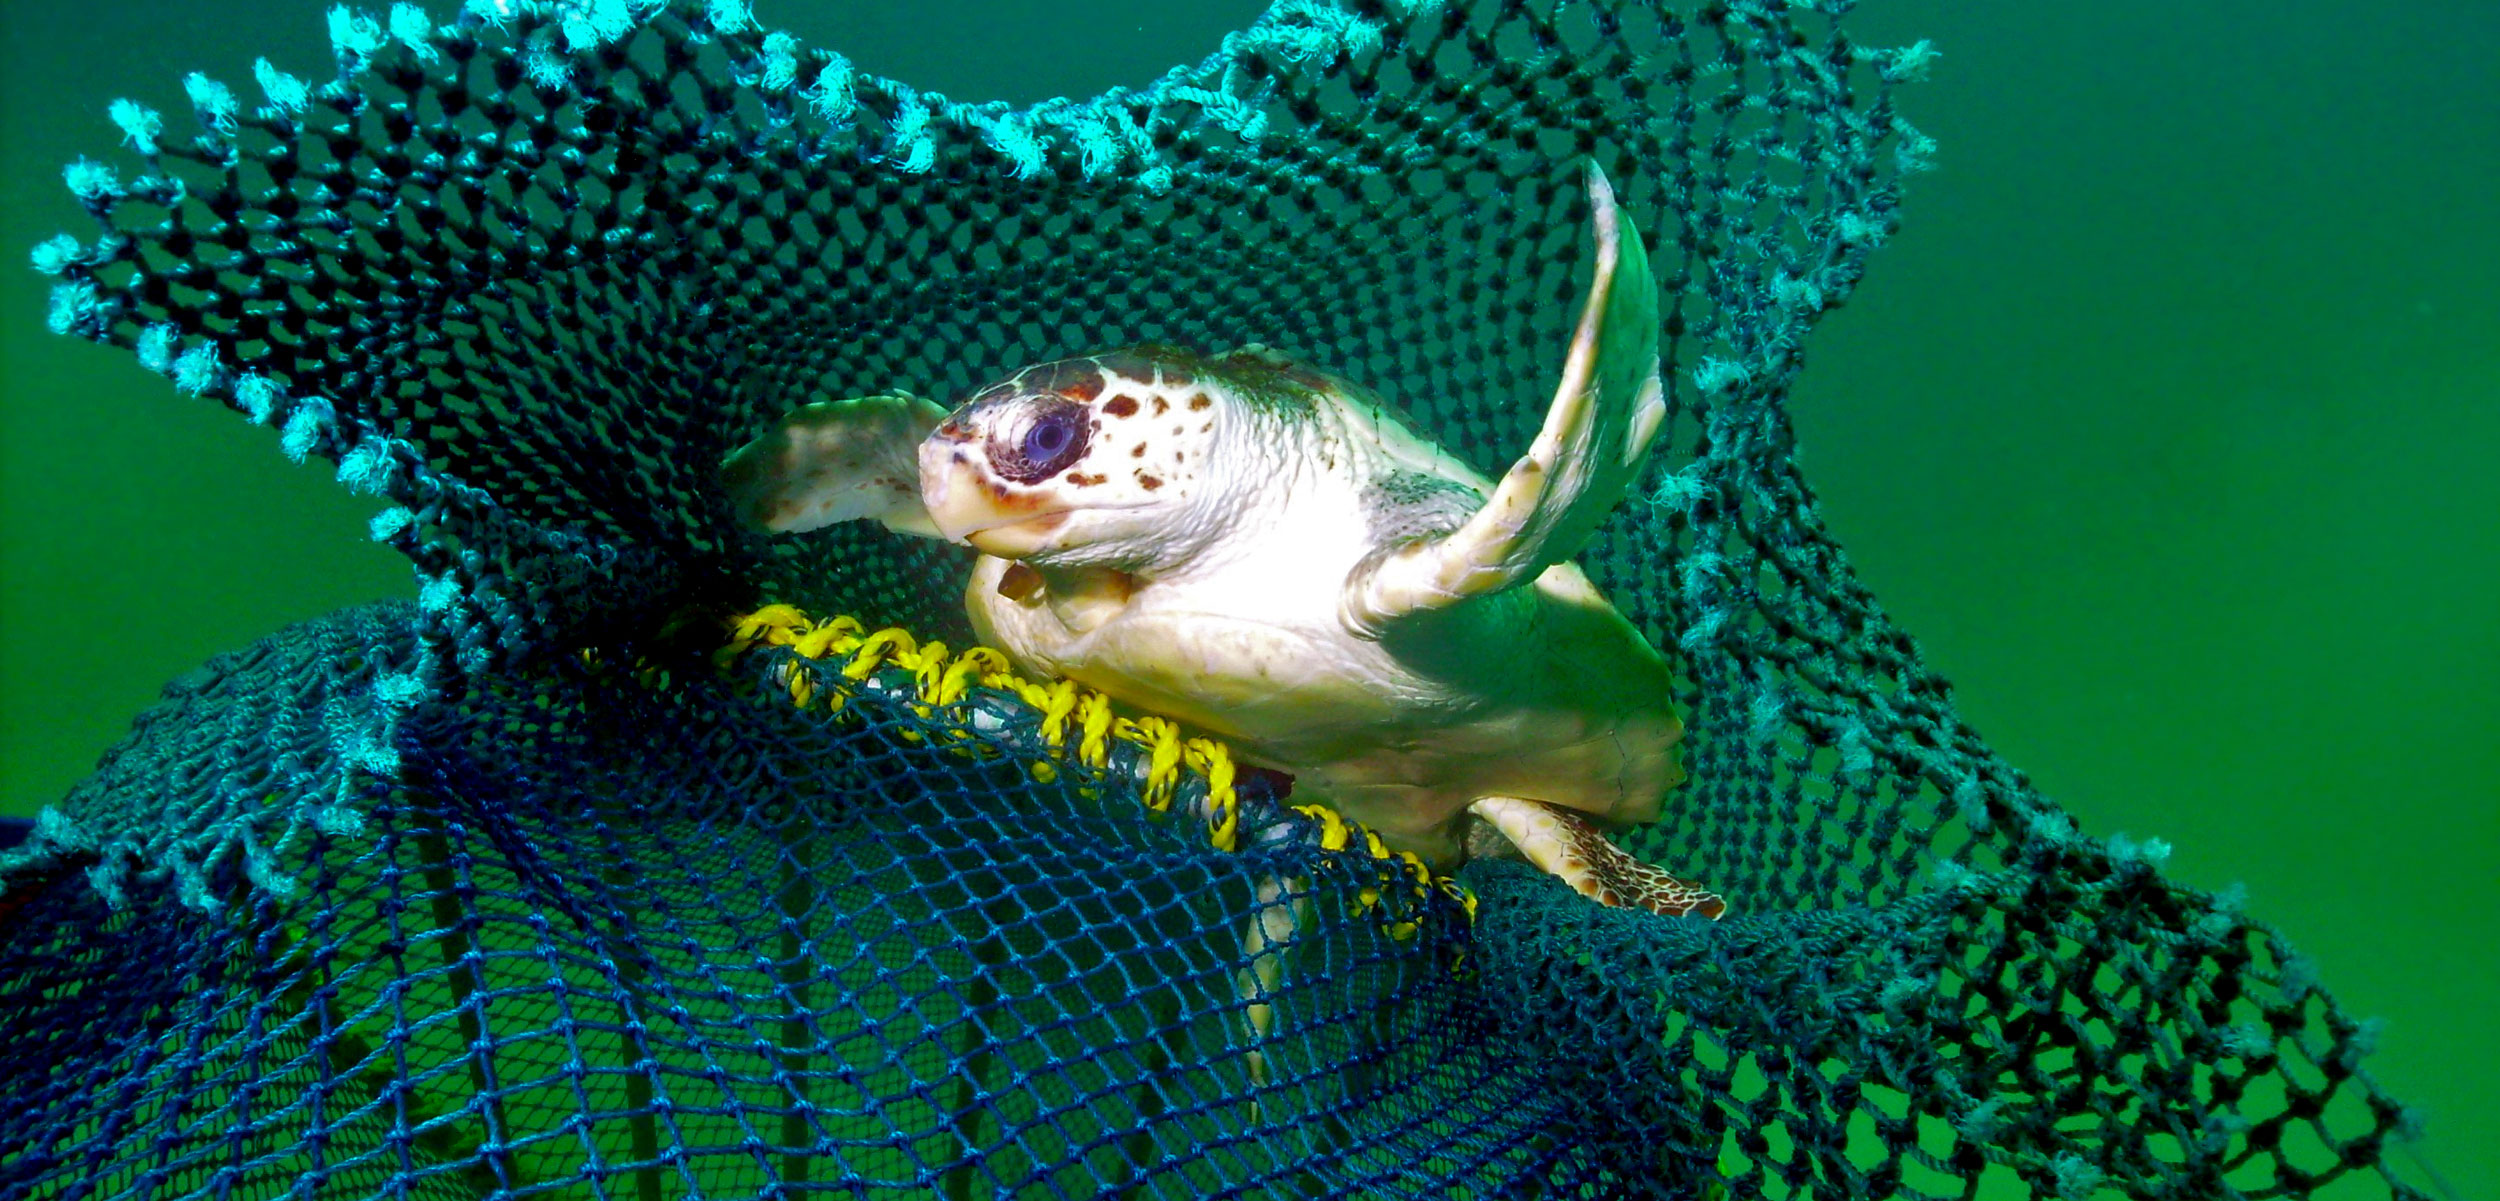 loggerhead turtle successfully escapes a net with a turtle excluder device installed